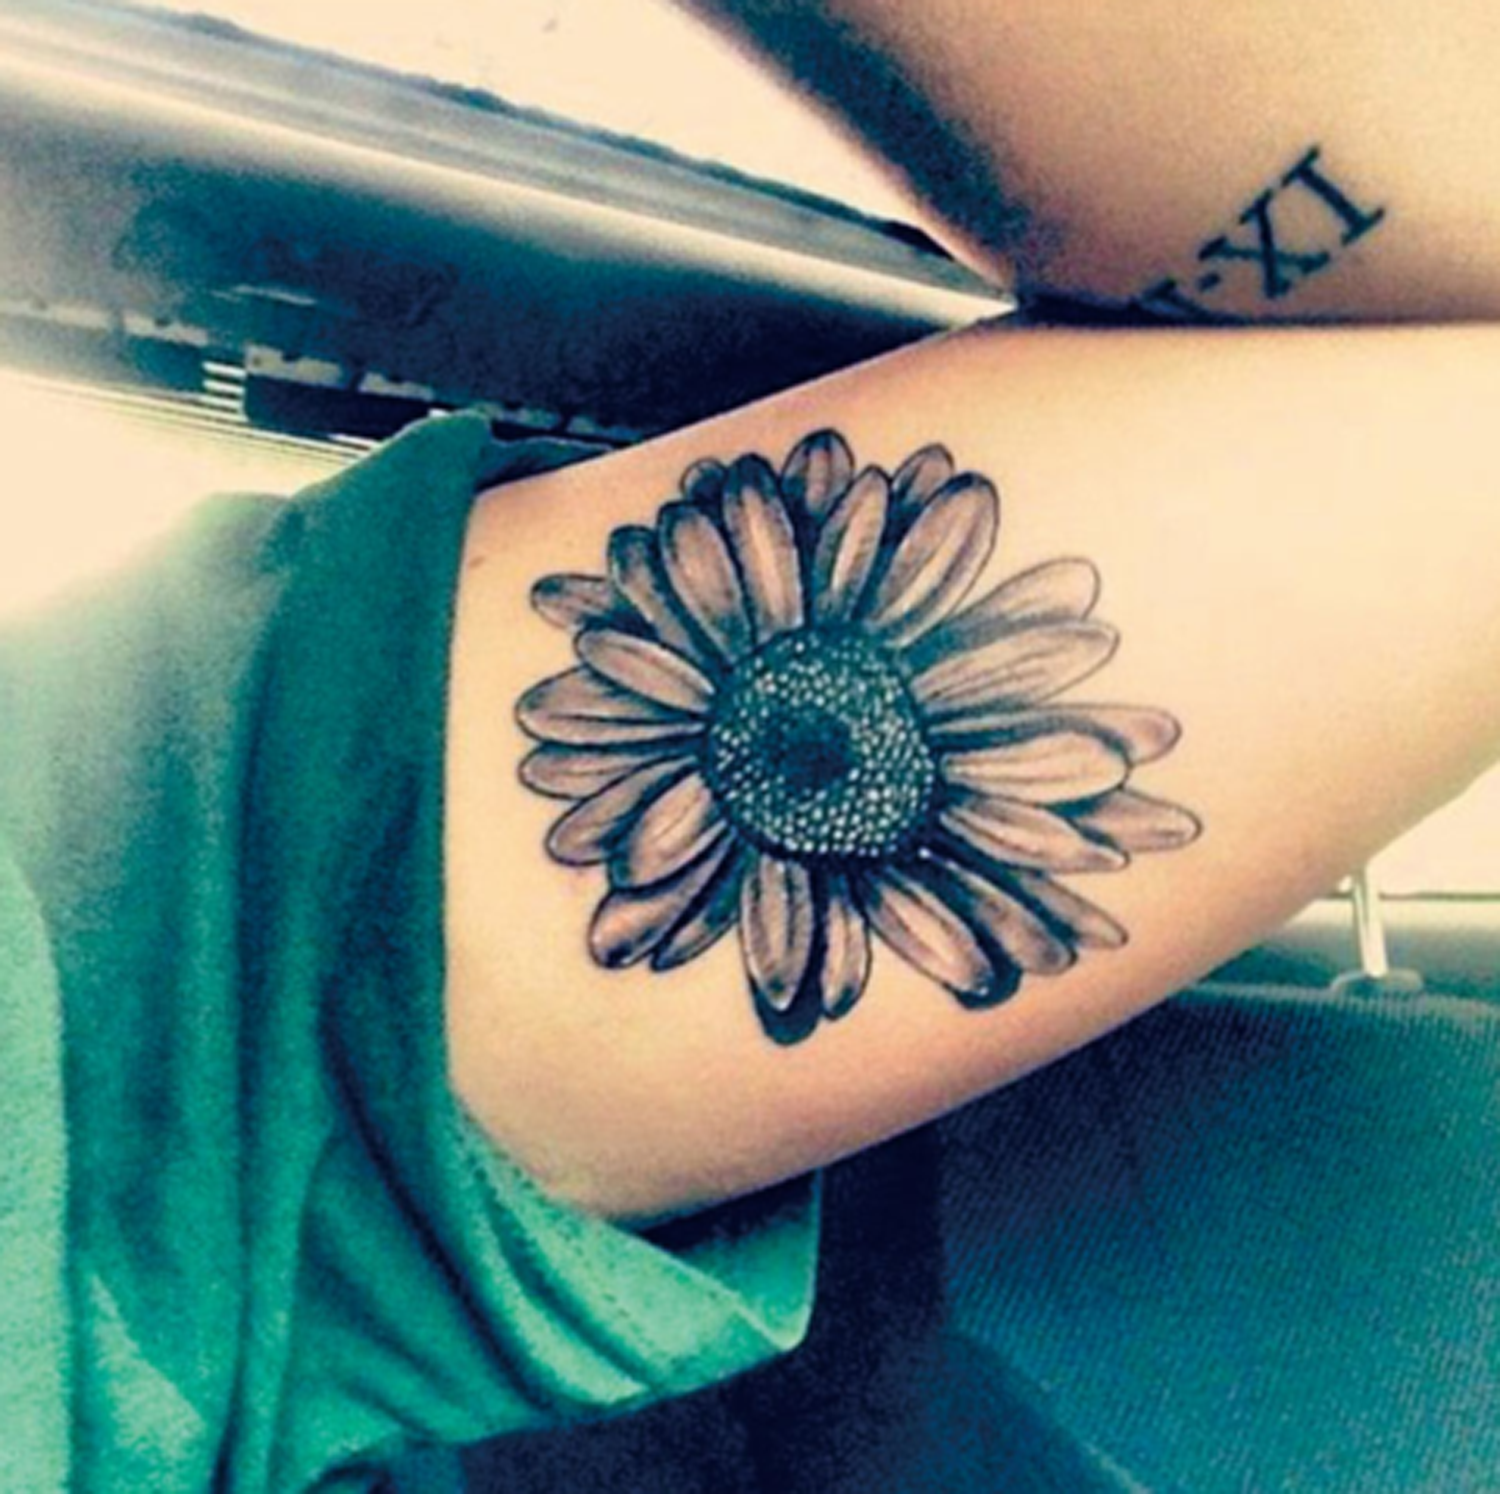 Black and White Sunflower Bicep Arm Tattoo Ideas for Women at MyBodiArt.com